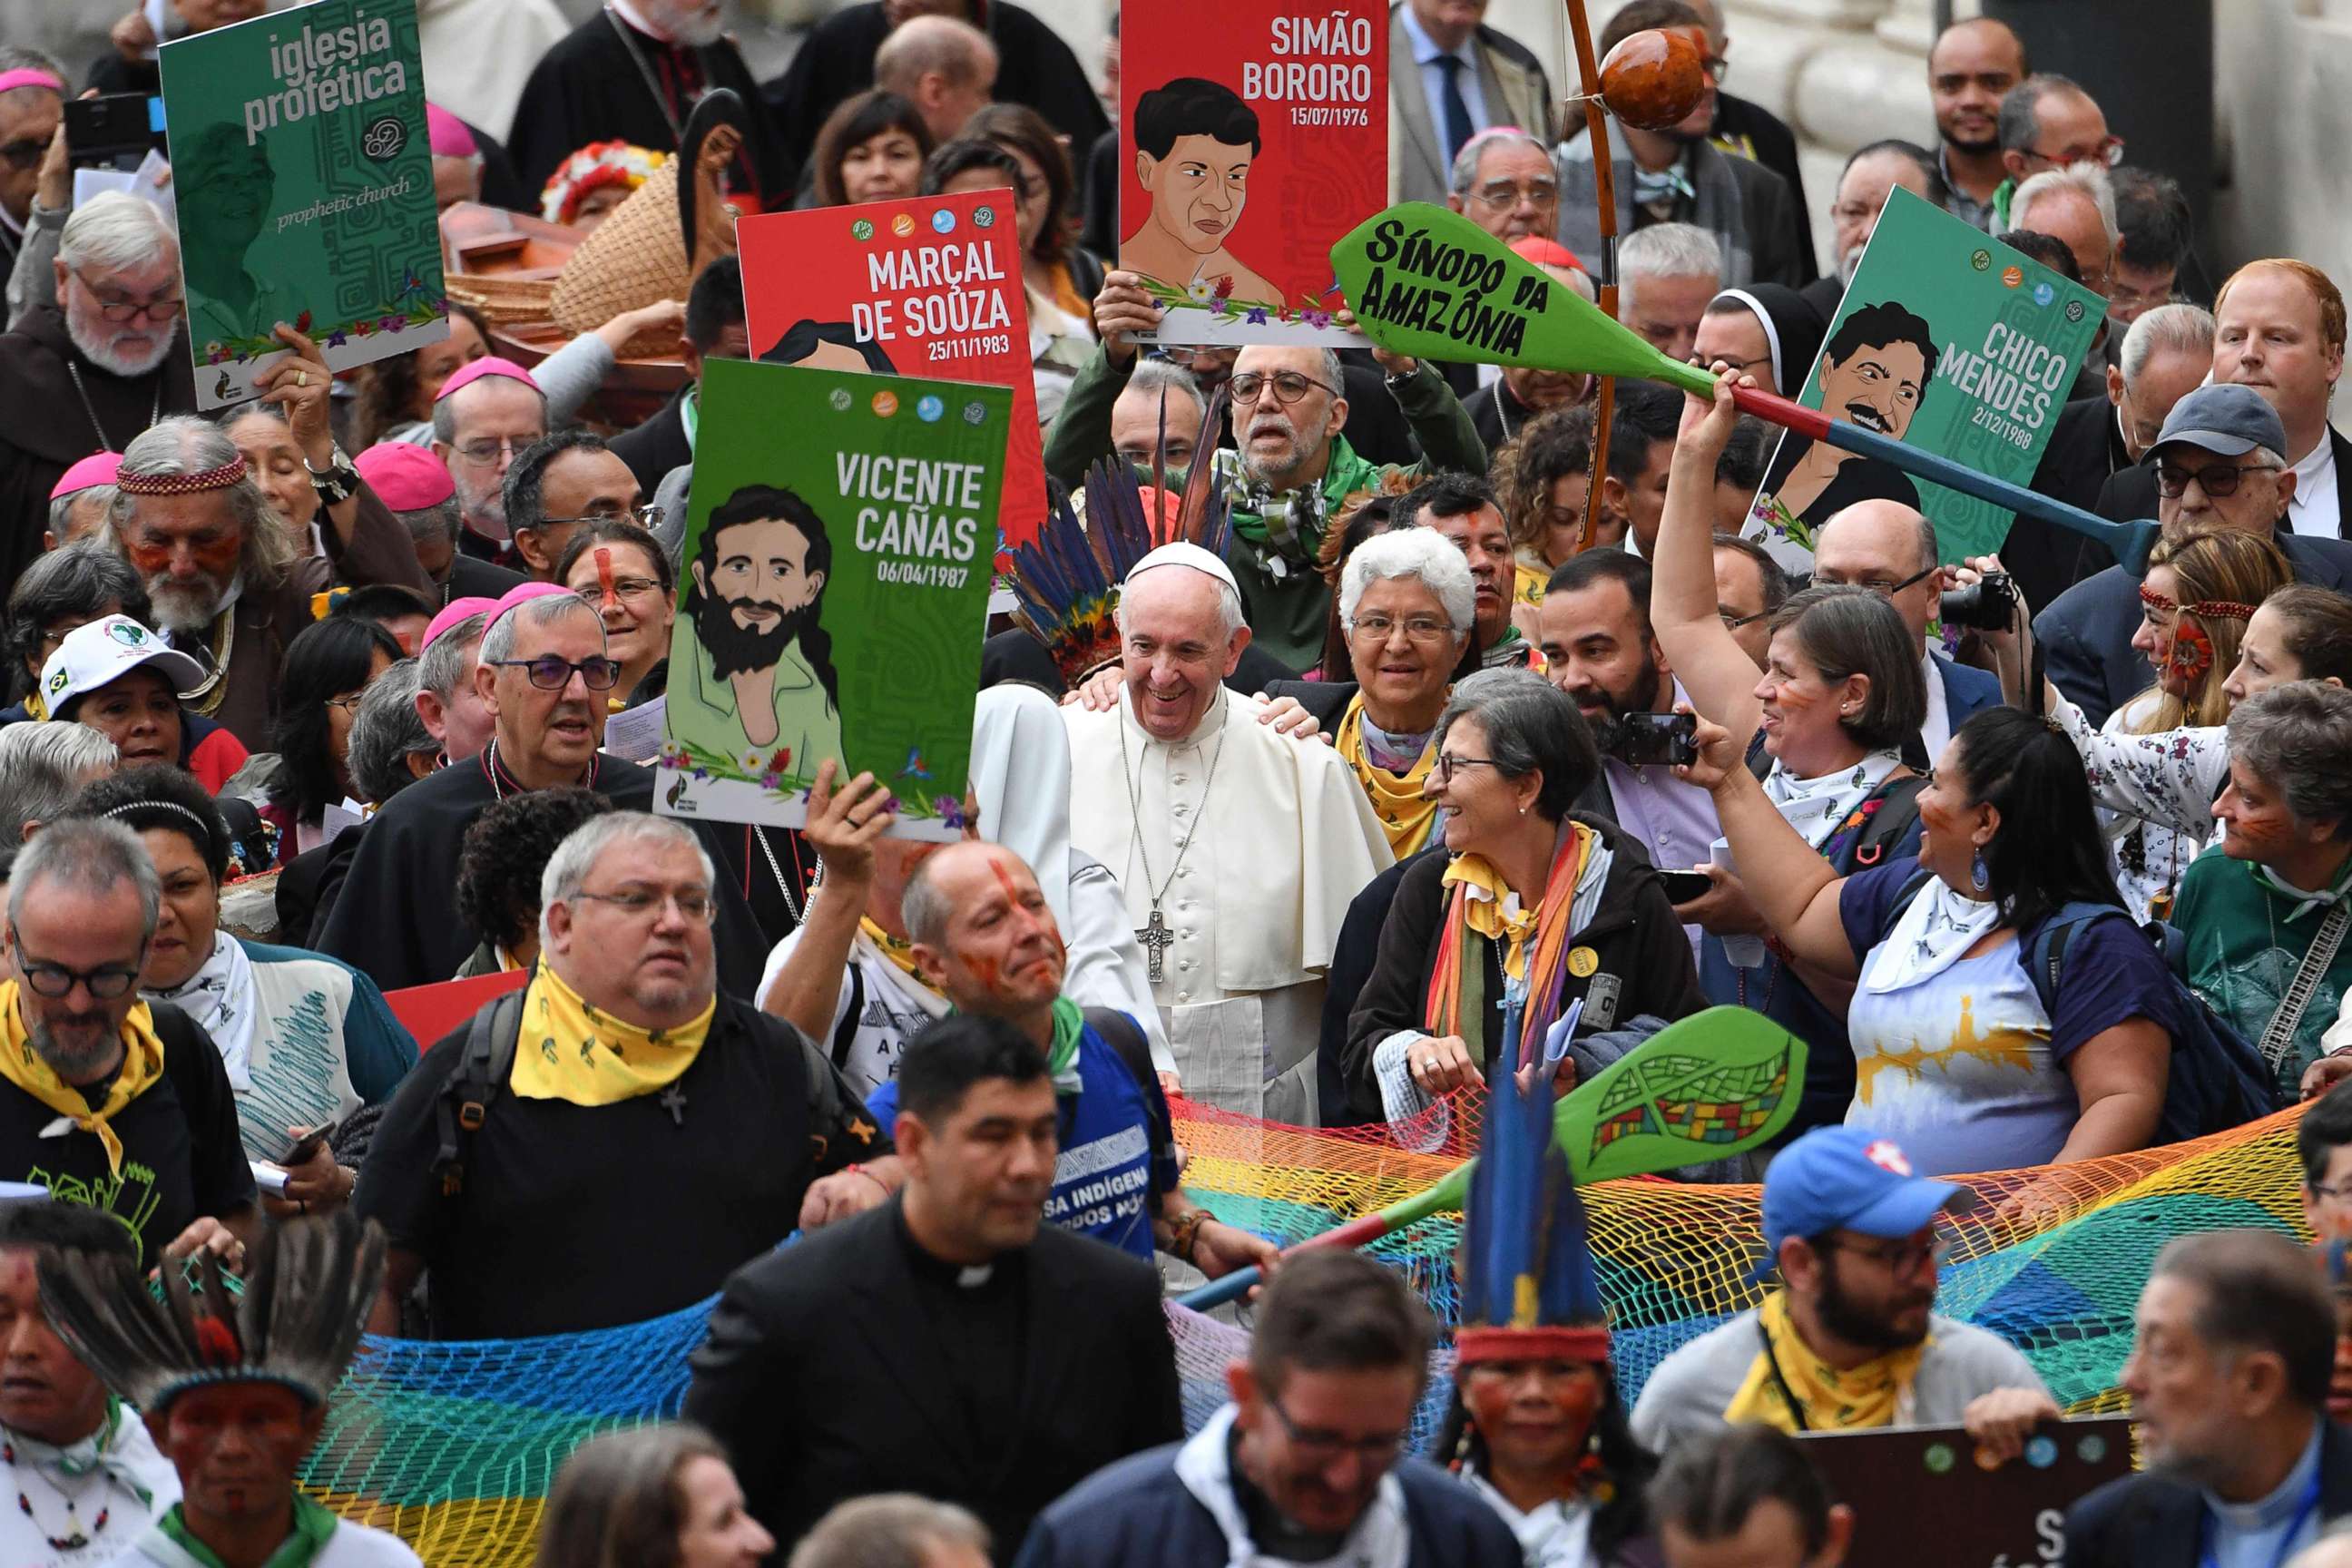 PHOTO: Representatives of the Amazon Rainforest's ethnic groups and Pope Francis march in procession during the opening of the Special Assembly of the Synod of Bishops for the Pan-Amazon Region, Oct. 7, 2019, outside St. Peter's Basilica in the Vatican.